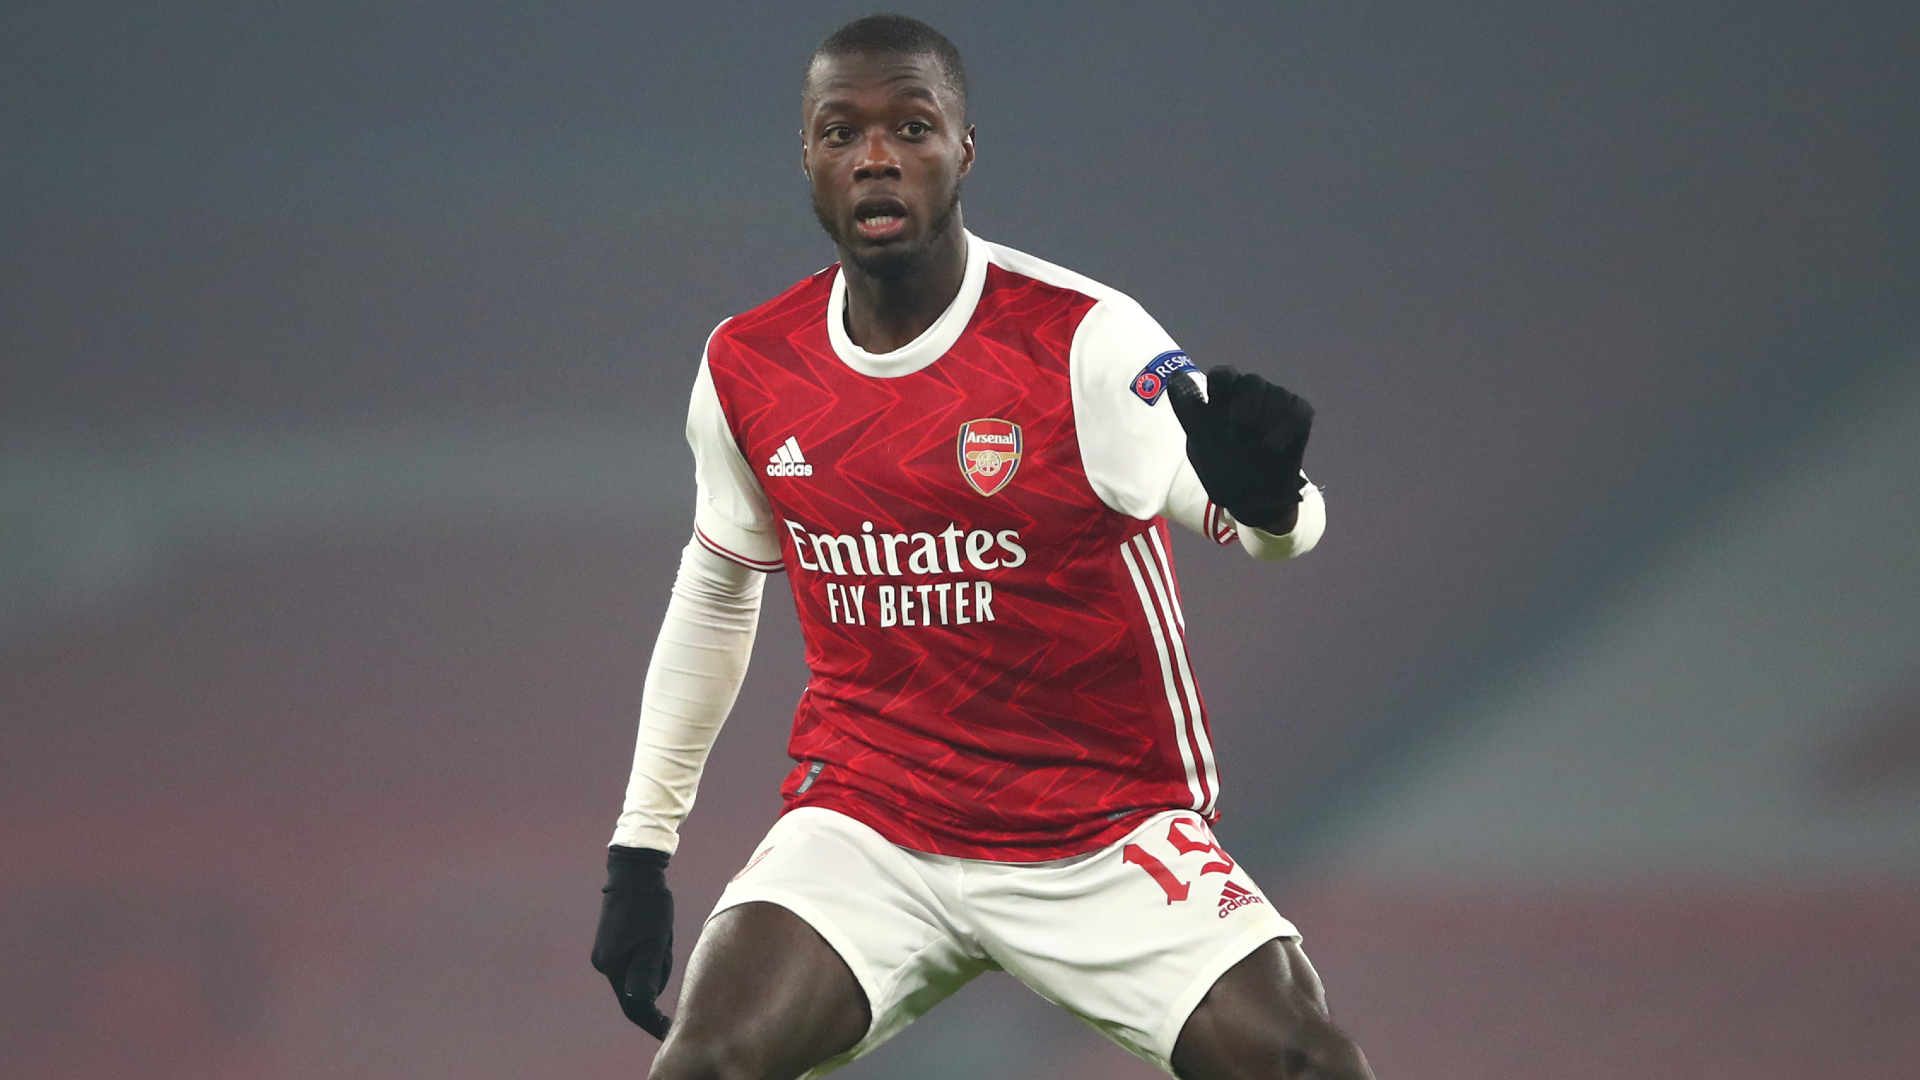 He was dismissed in just his second Premier League start of the season and Arsenal's Nicolas Pepe has taken to social media to apologise.